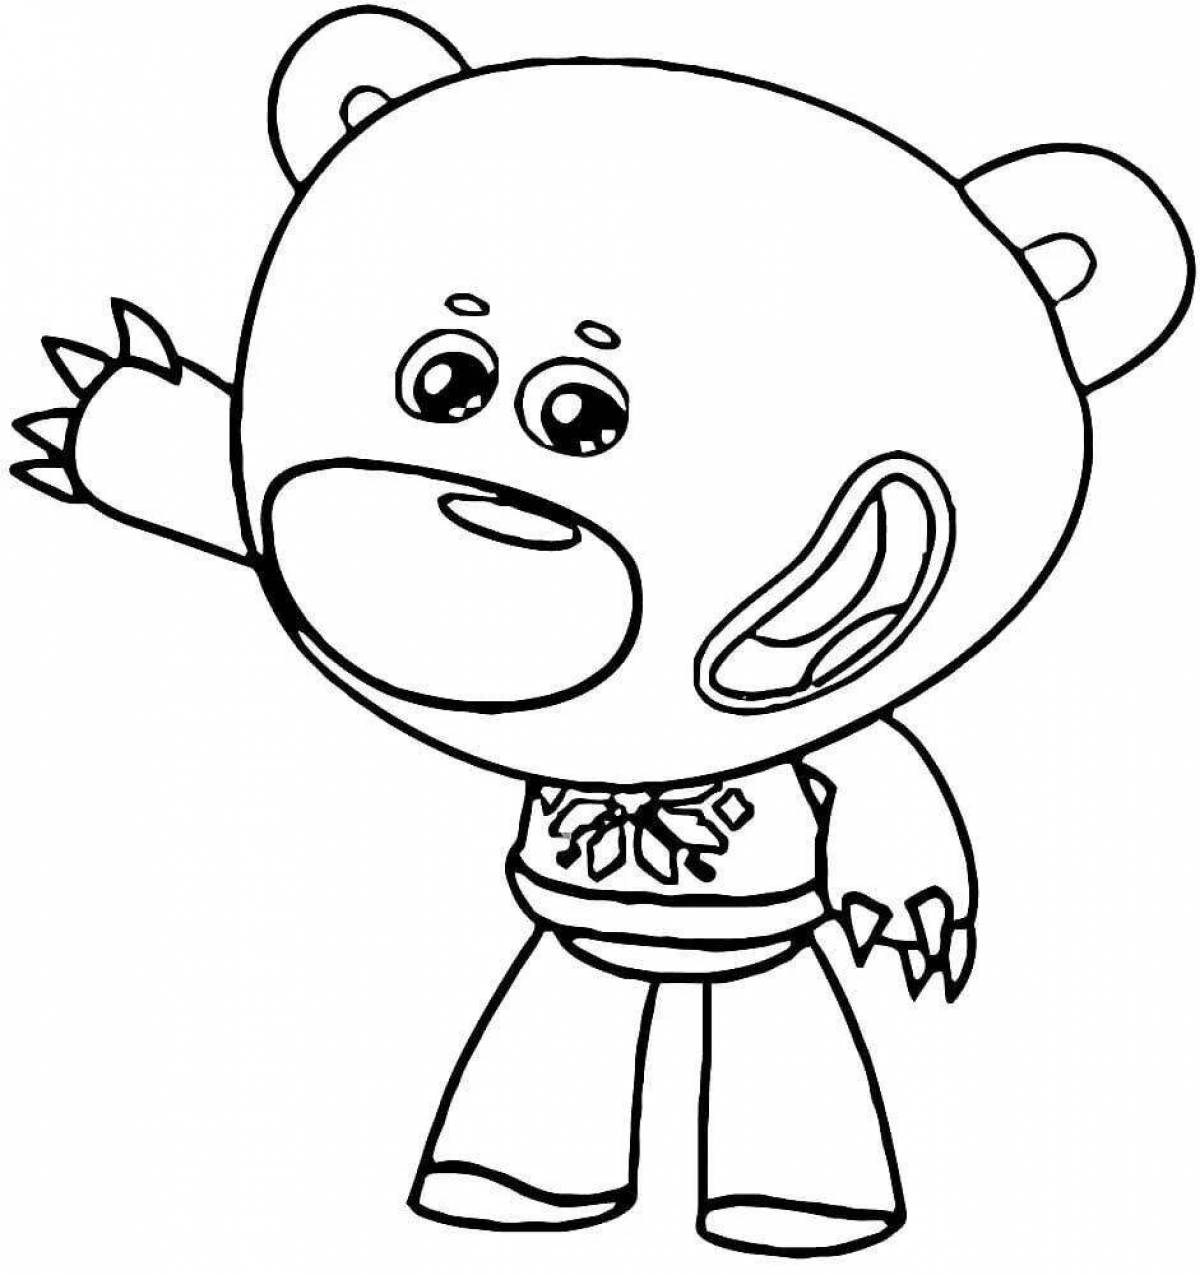 Coloring book excited teddy bear